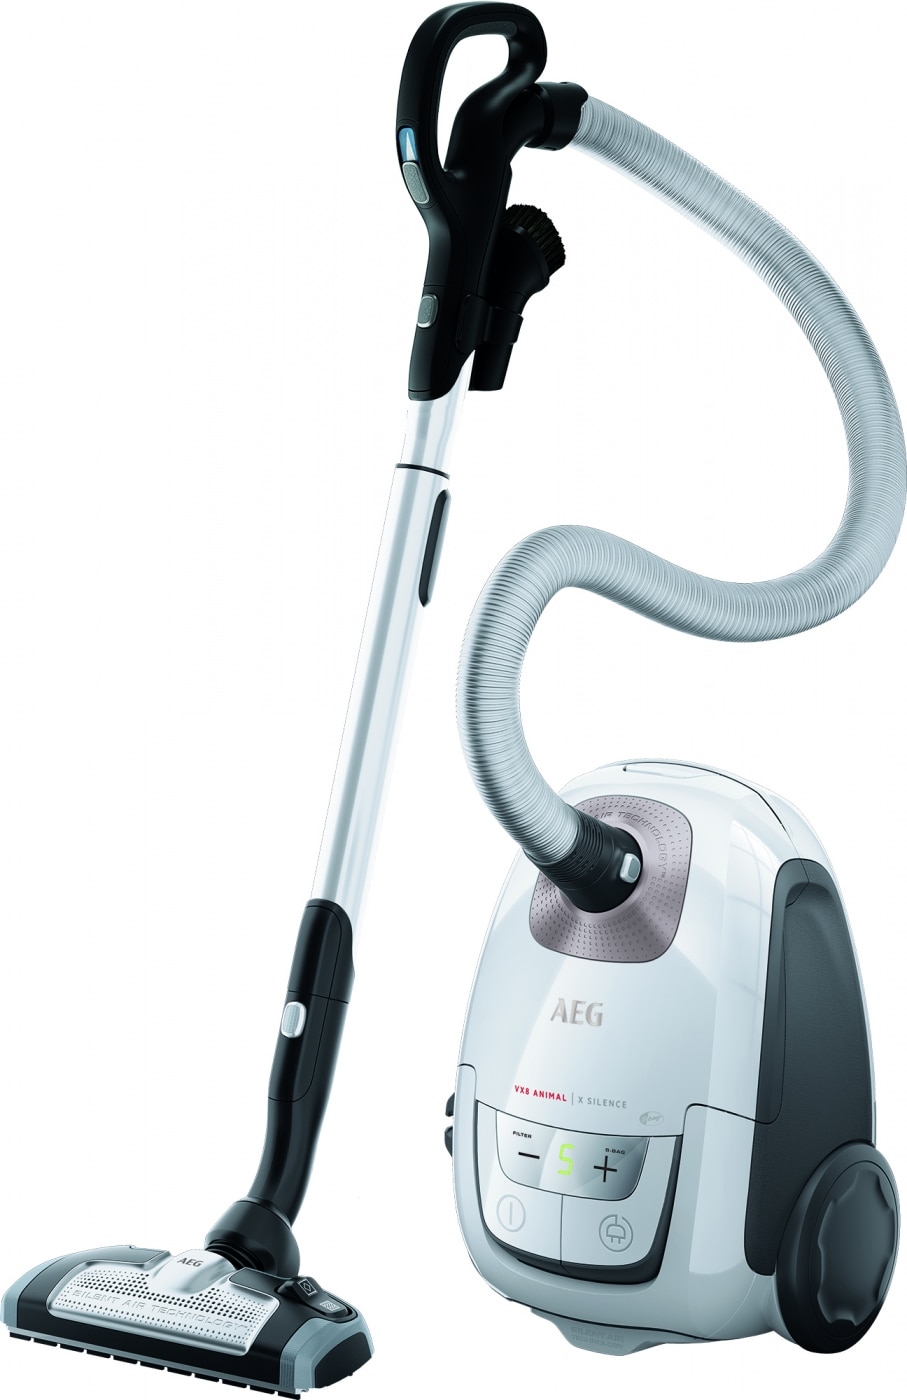 Imperialisme In Buitenshuis Electrolux vacuum cleaner retakes position as world's most silent –  Electrolux Group